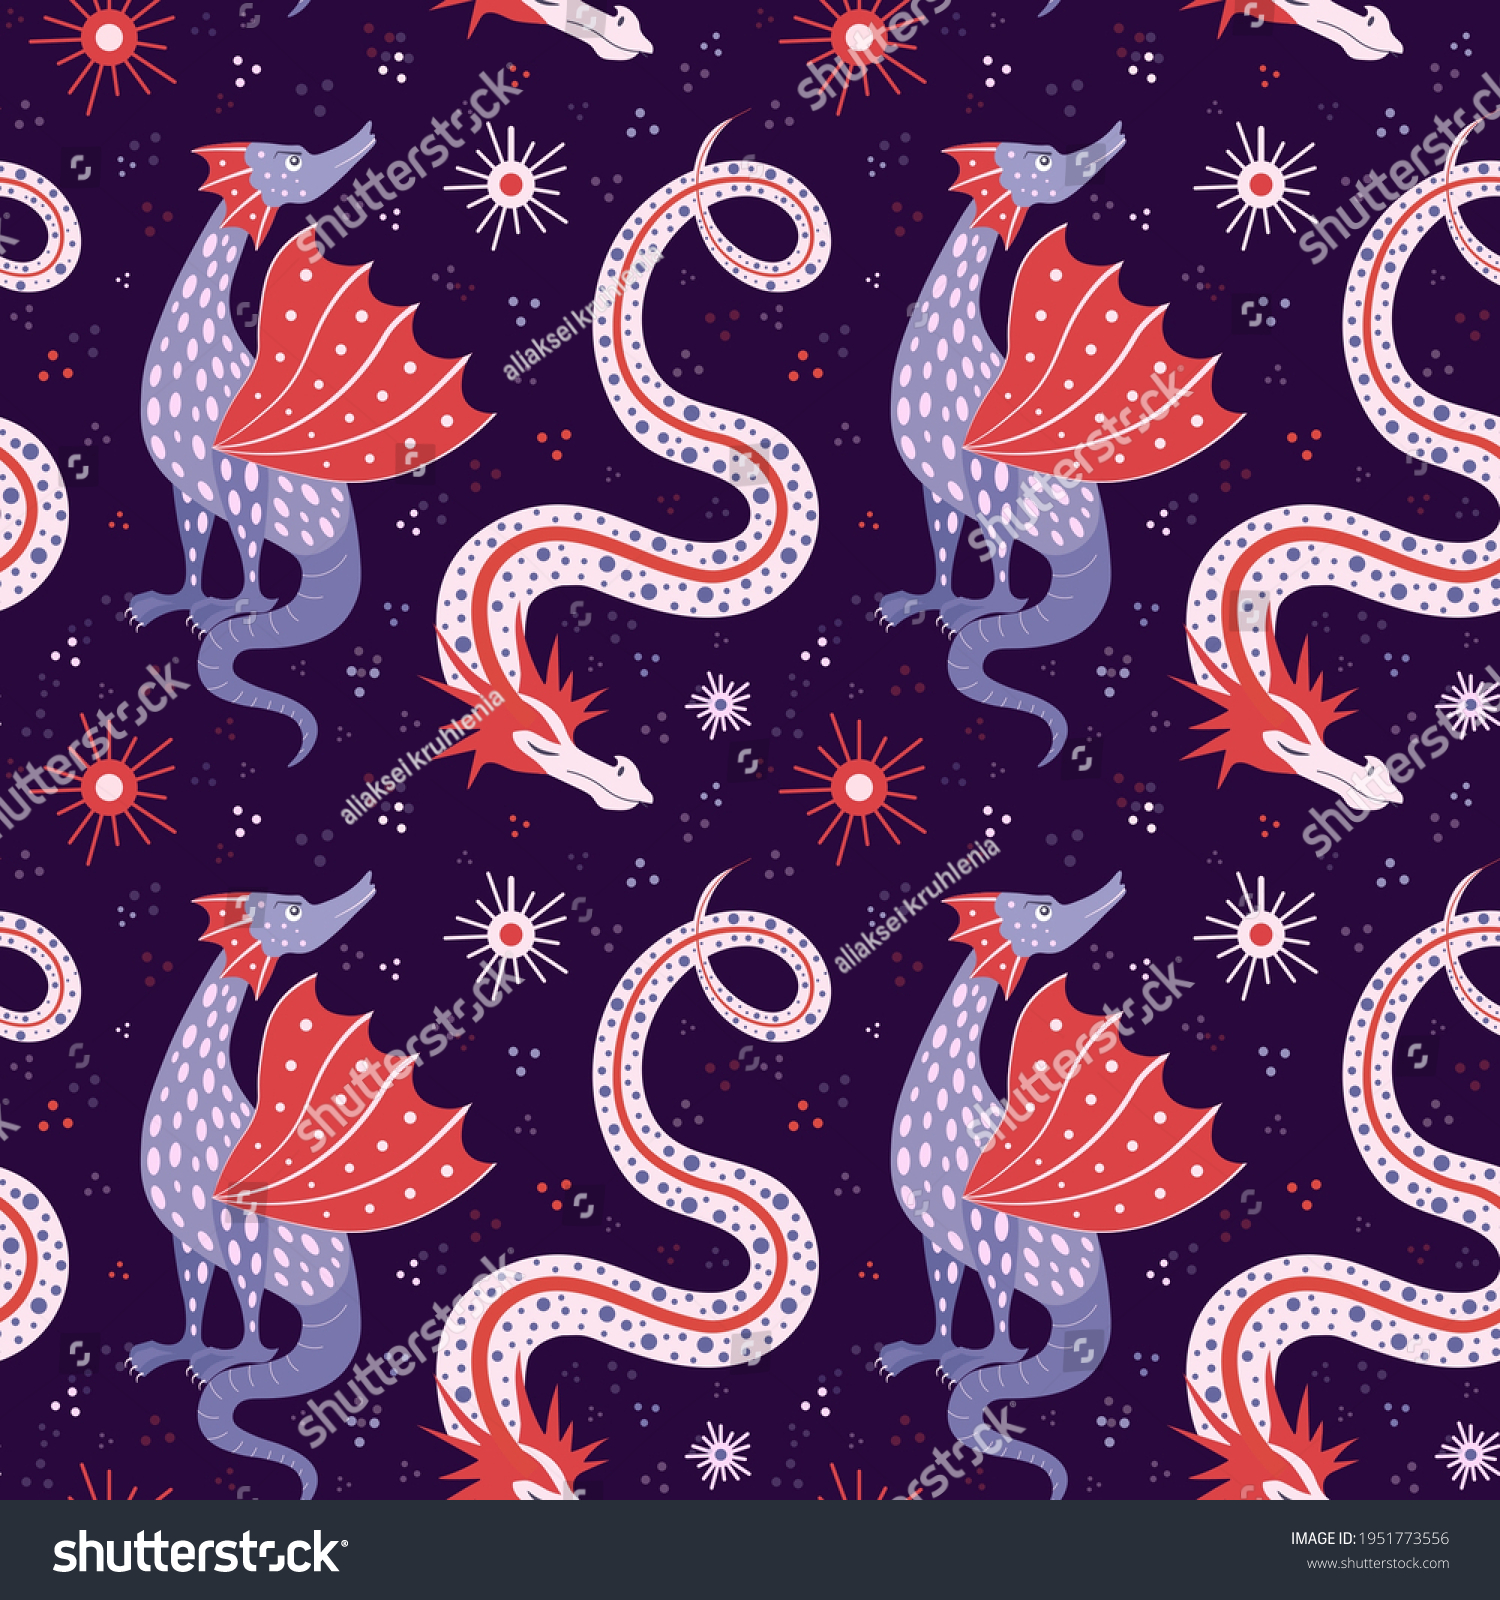 SVG of Cartoon dragons pattern with supernatural reptilian creatures from folk mythology. Legendary cryptid animals in seamless background for wallpapers, prints, textiles and fabric design. svg